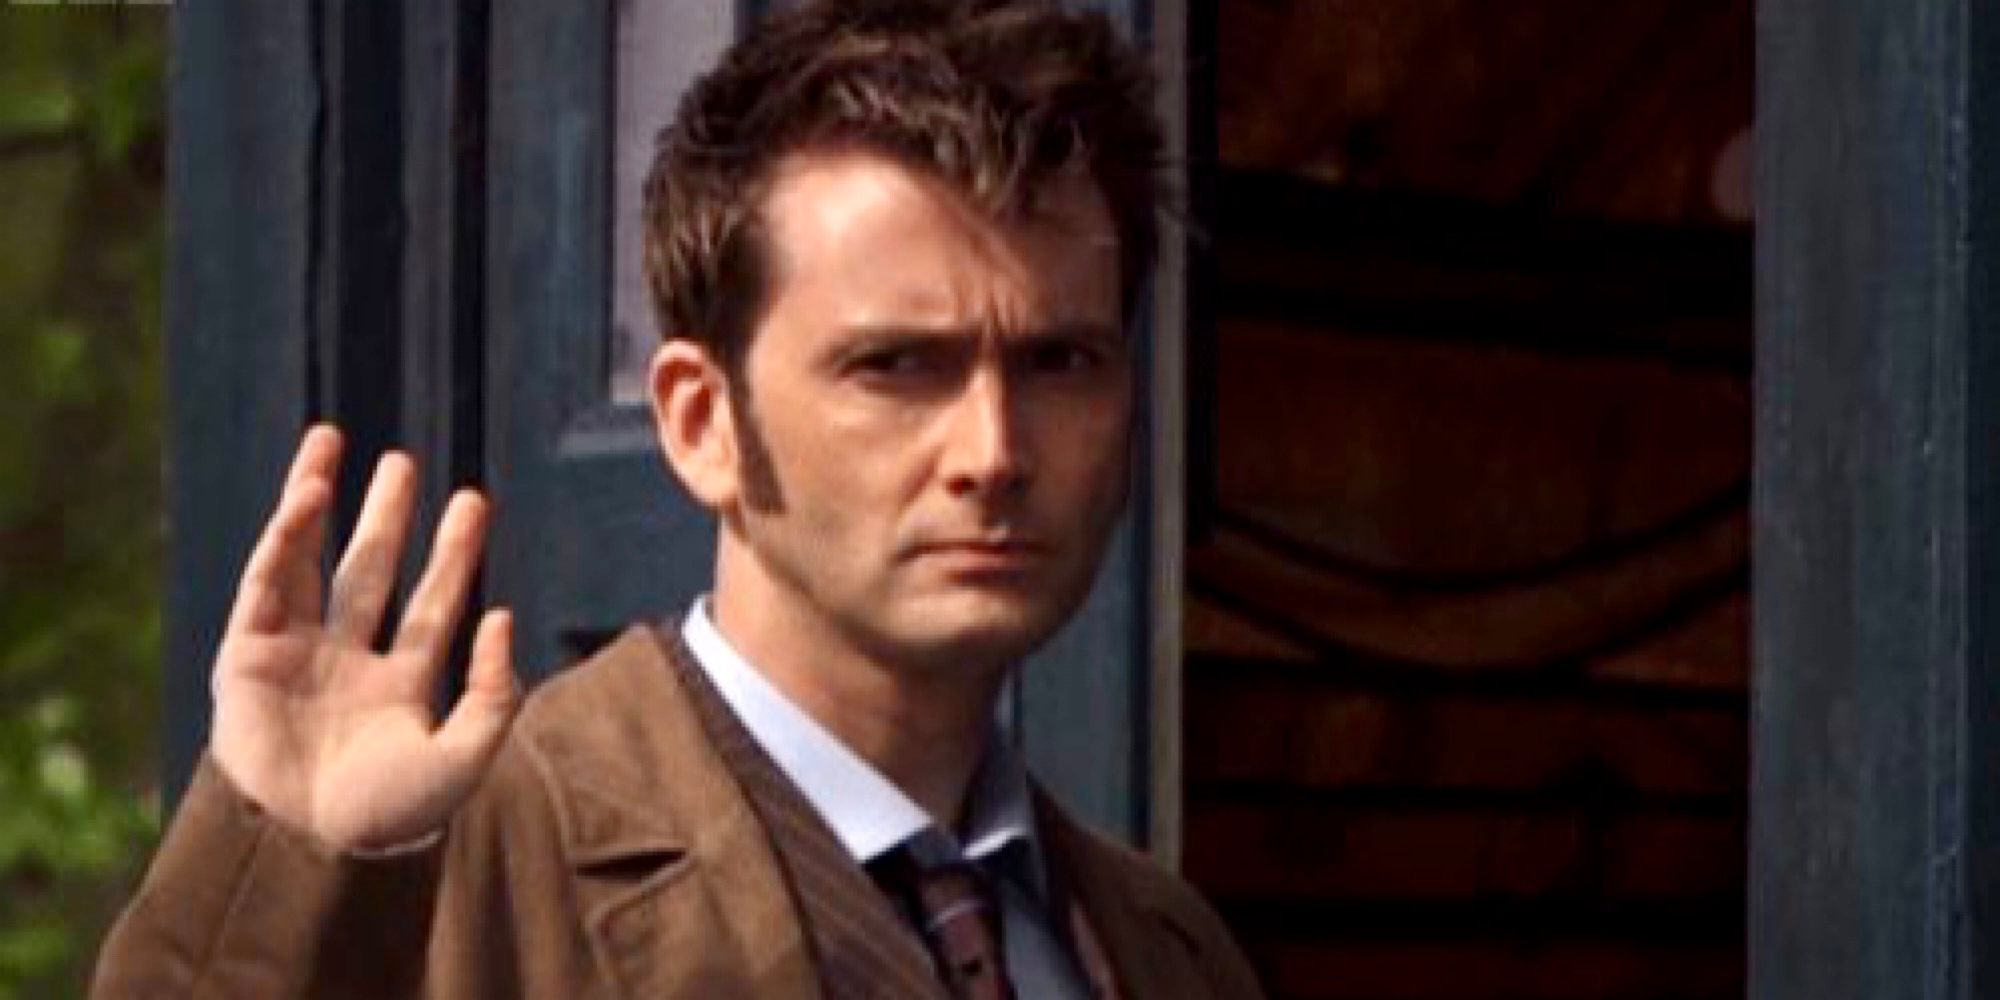 The Tenth Doctor waves goodbye outside of his TARDIS in Doctor Who